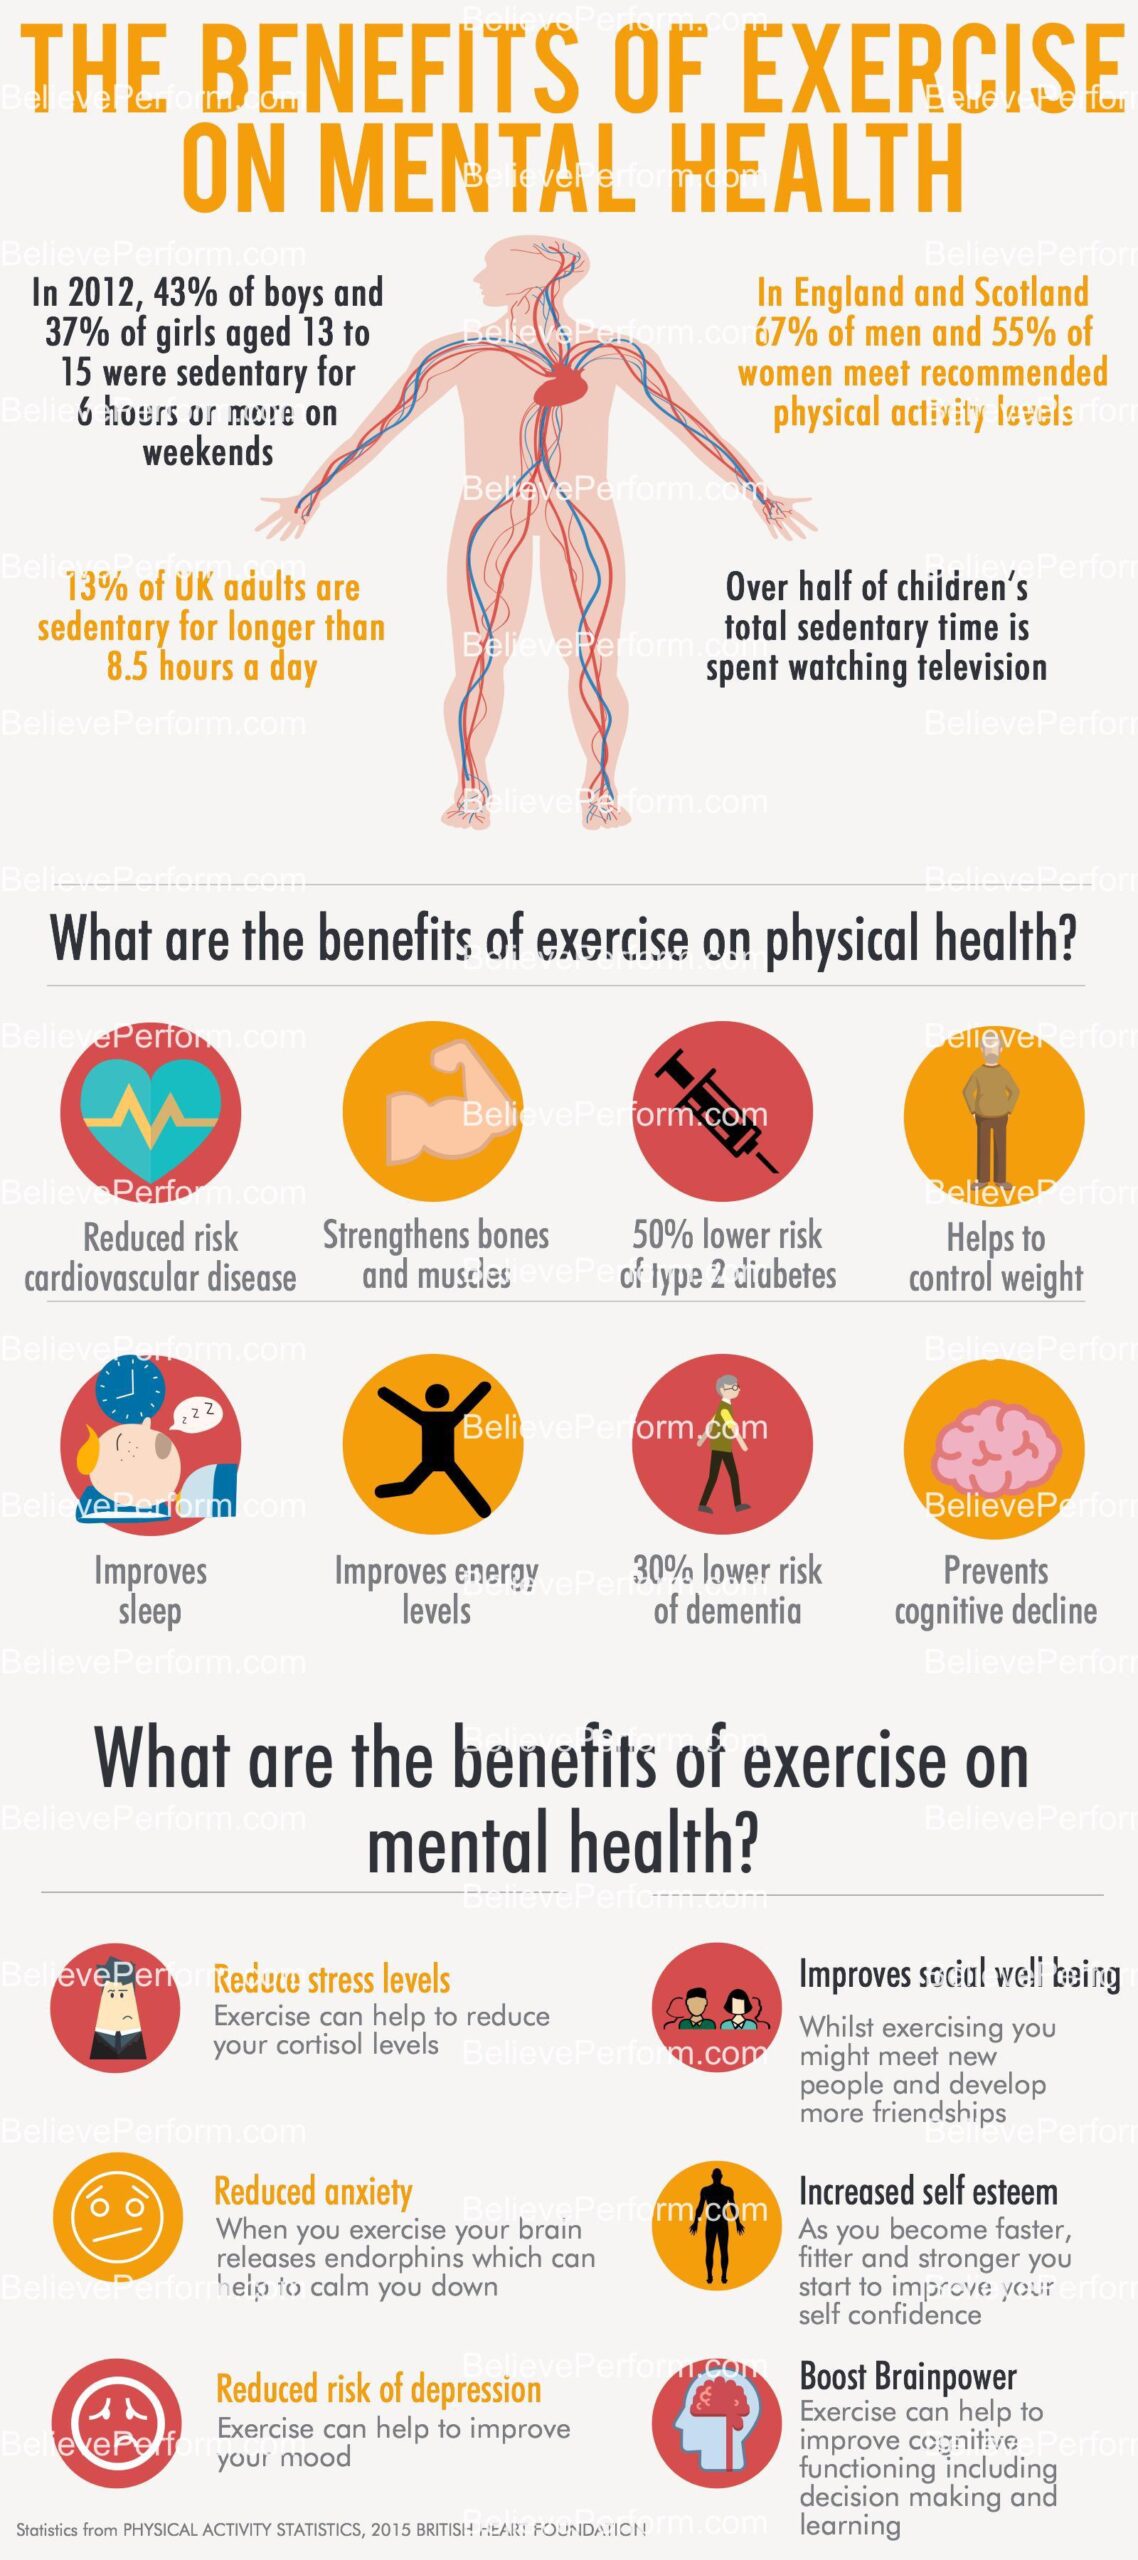 The benefits of exercise on mental health - BelievePerform - The